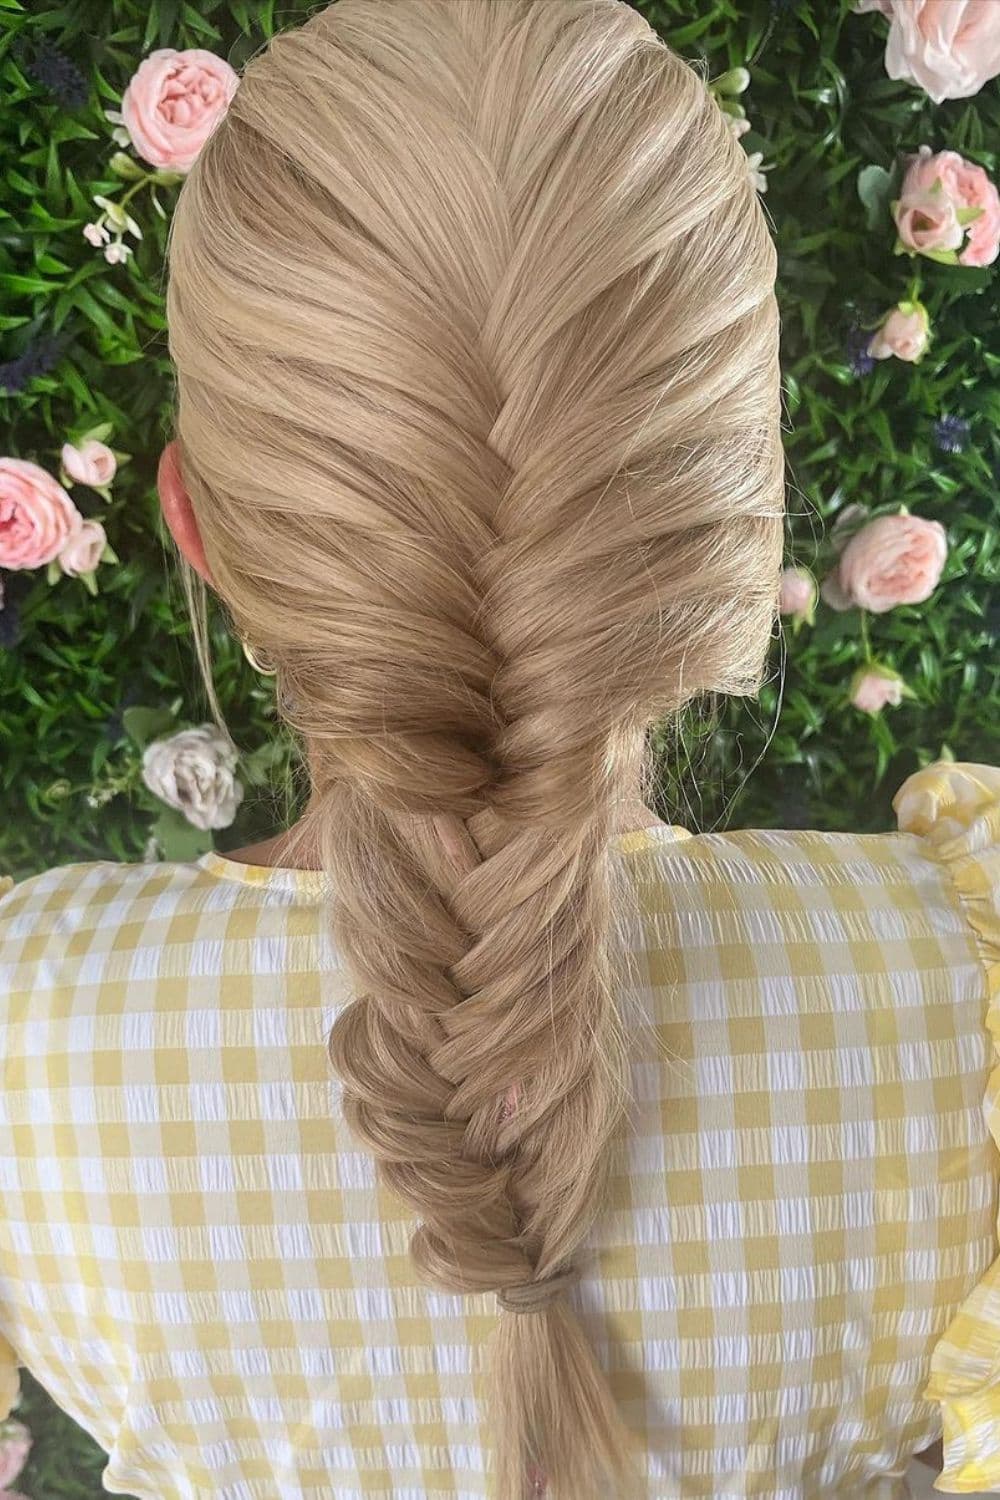 A woman with blonde fishtail braids.